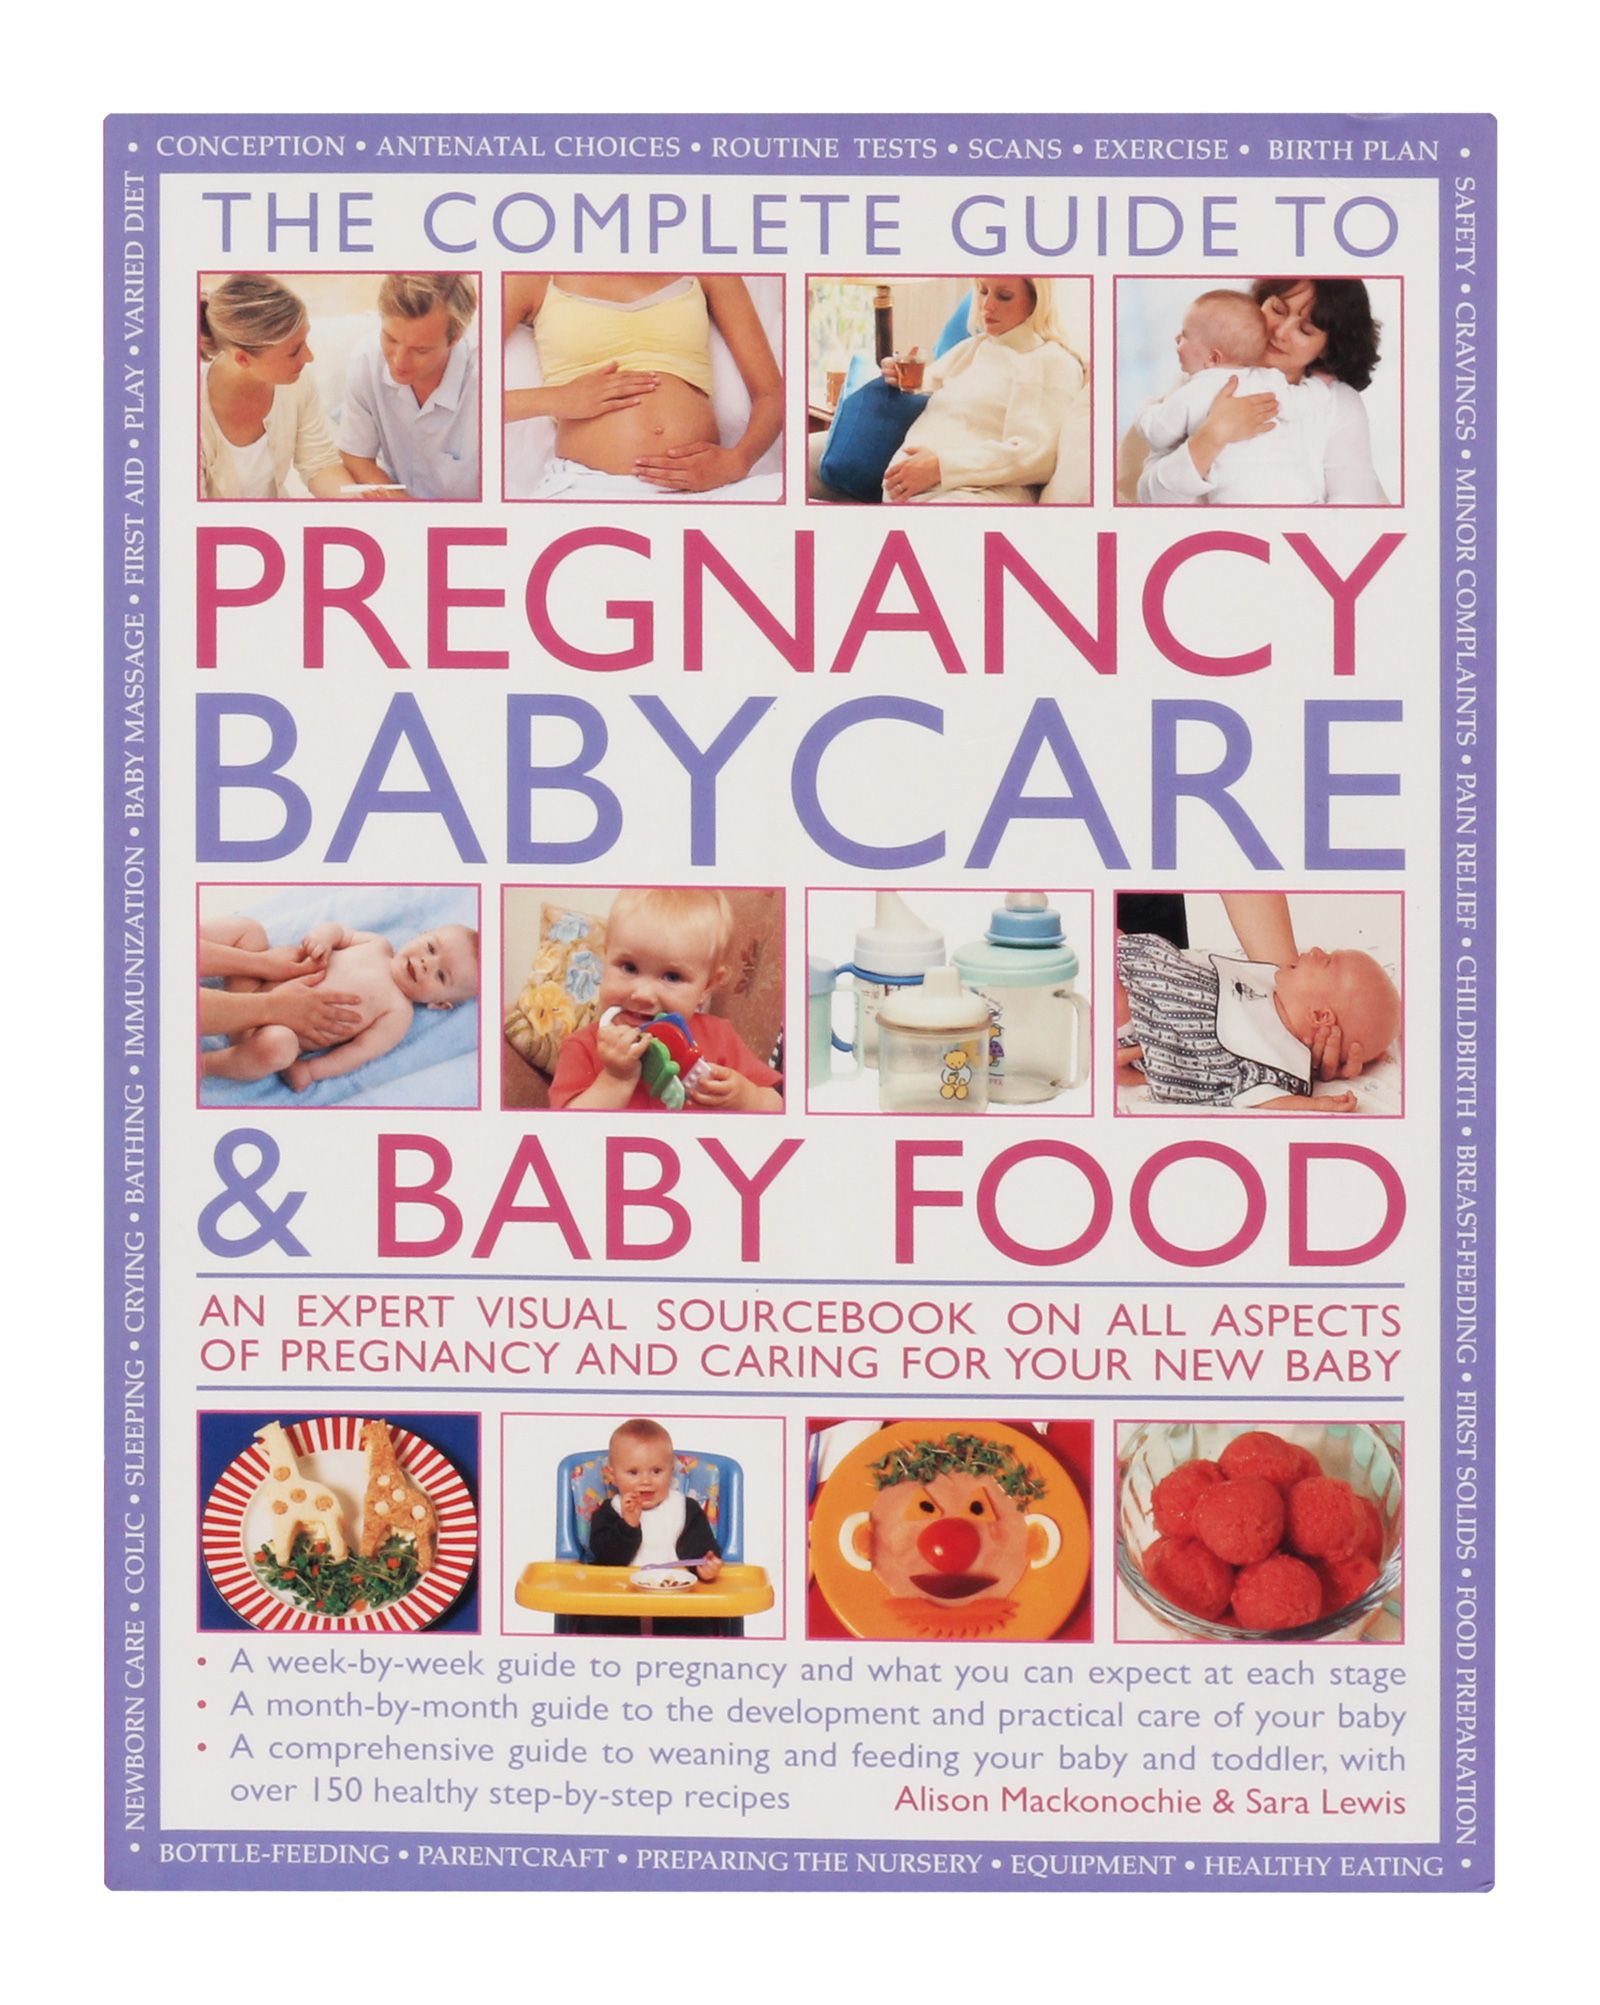 The Complete Guide to Pregnancy and Baby Care and Baby Food